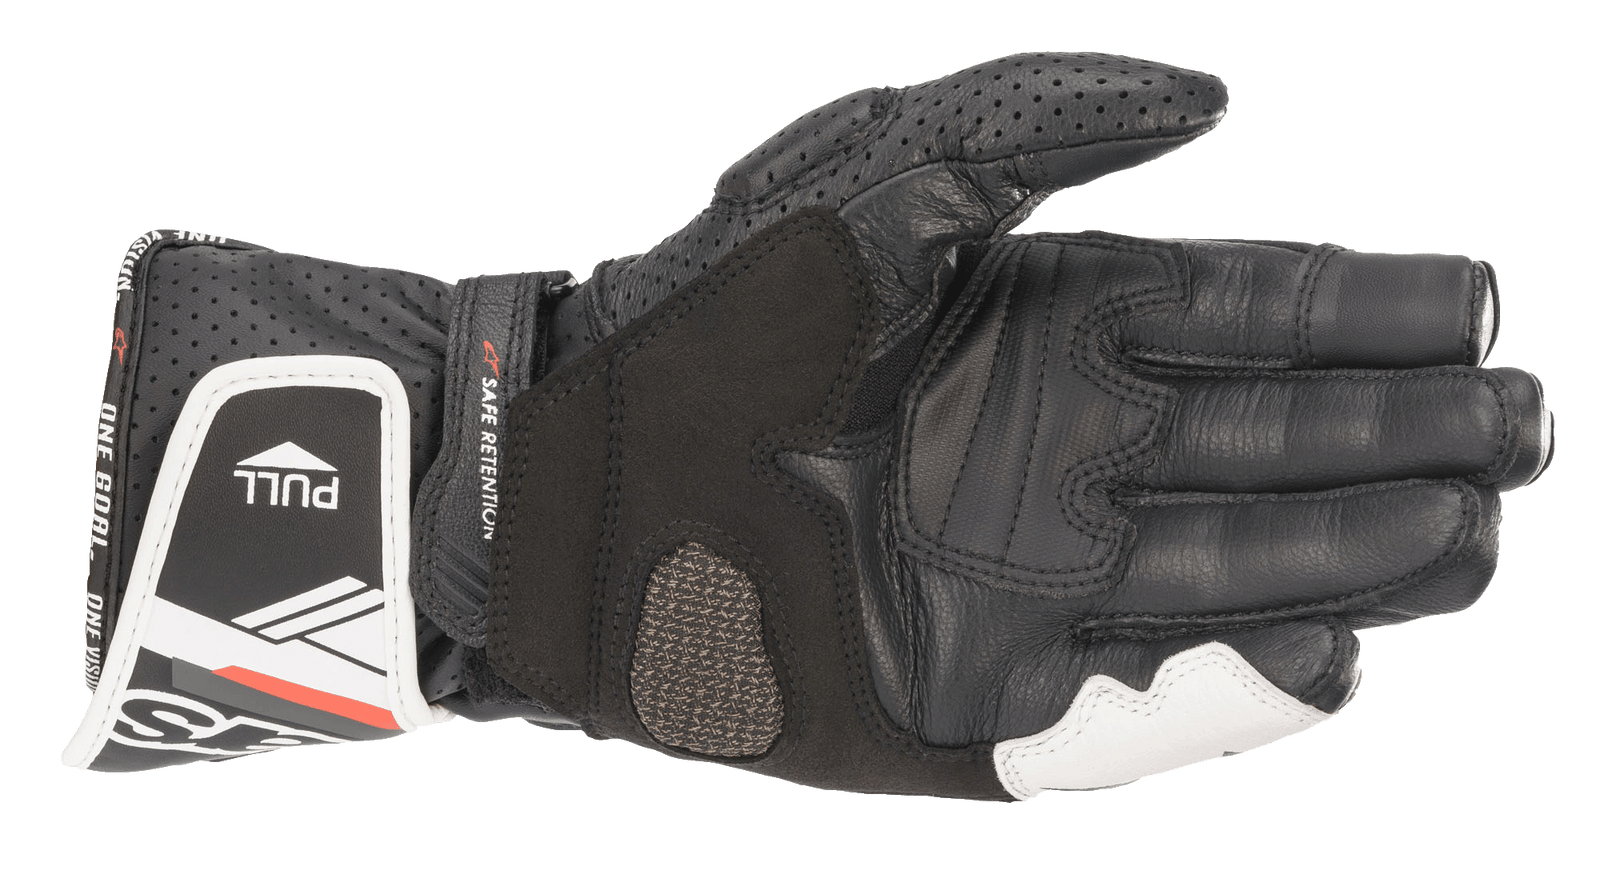 The Women Stella SP-8 V3 Gloves by Alpinestars EU are constructed from full grain goat leather and feature hard knuckle protection for enhanced safety. These black and white motorcycle gloves boast branding and a logo with lettering on the wrist strap and fingers. Designed for protective riding, they also offer ventilation holes for added comfort.